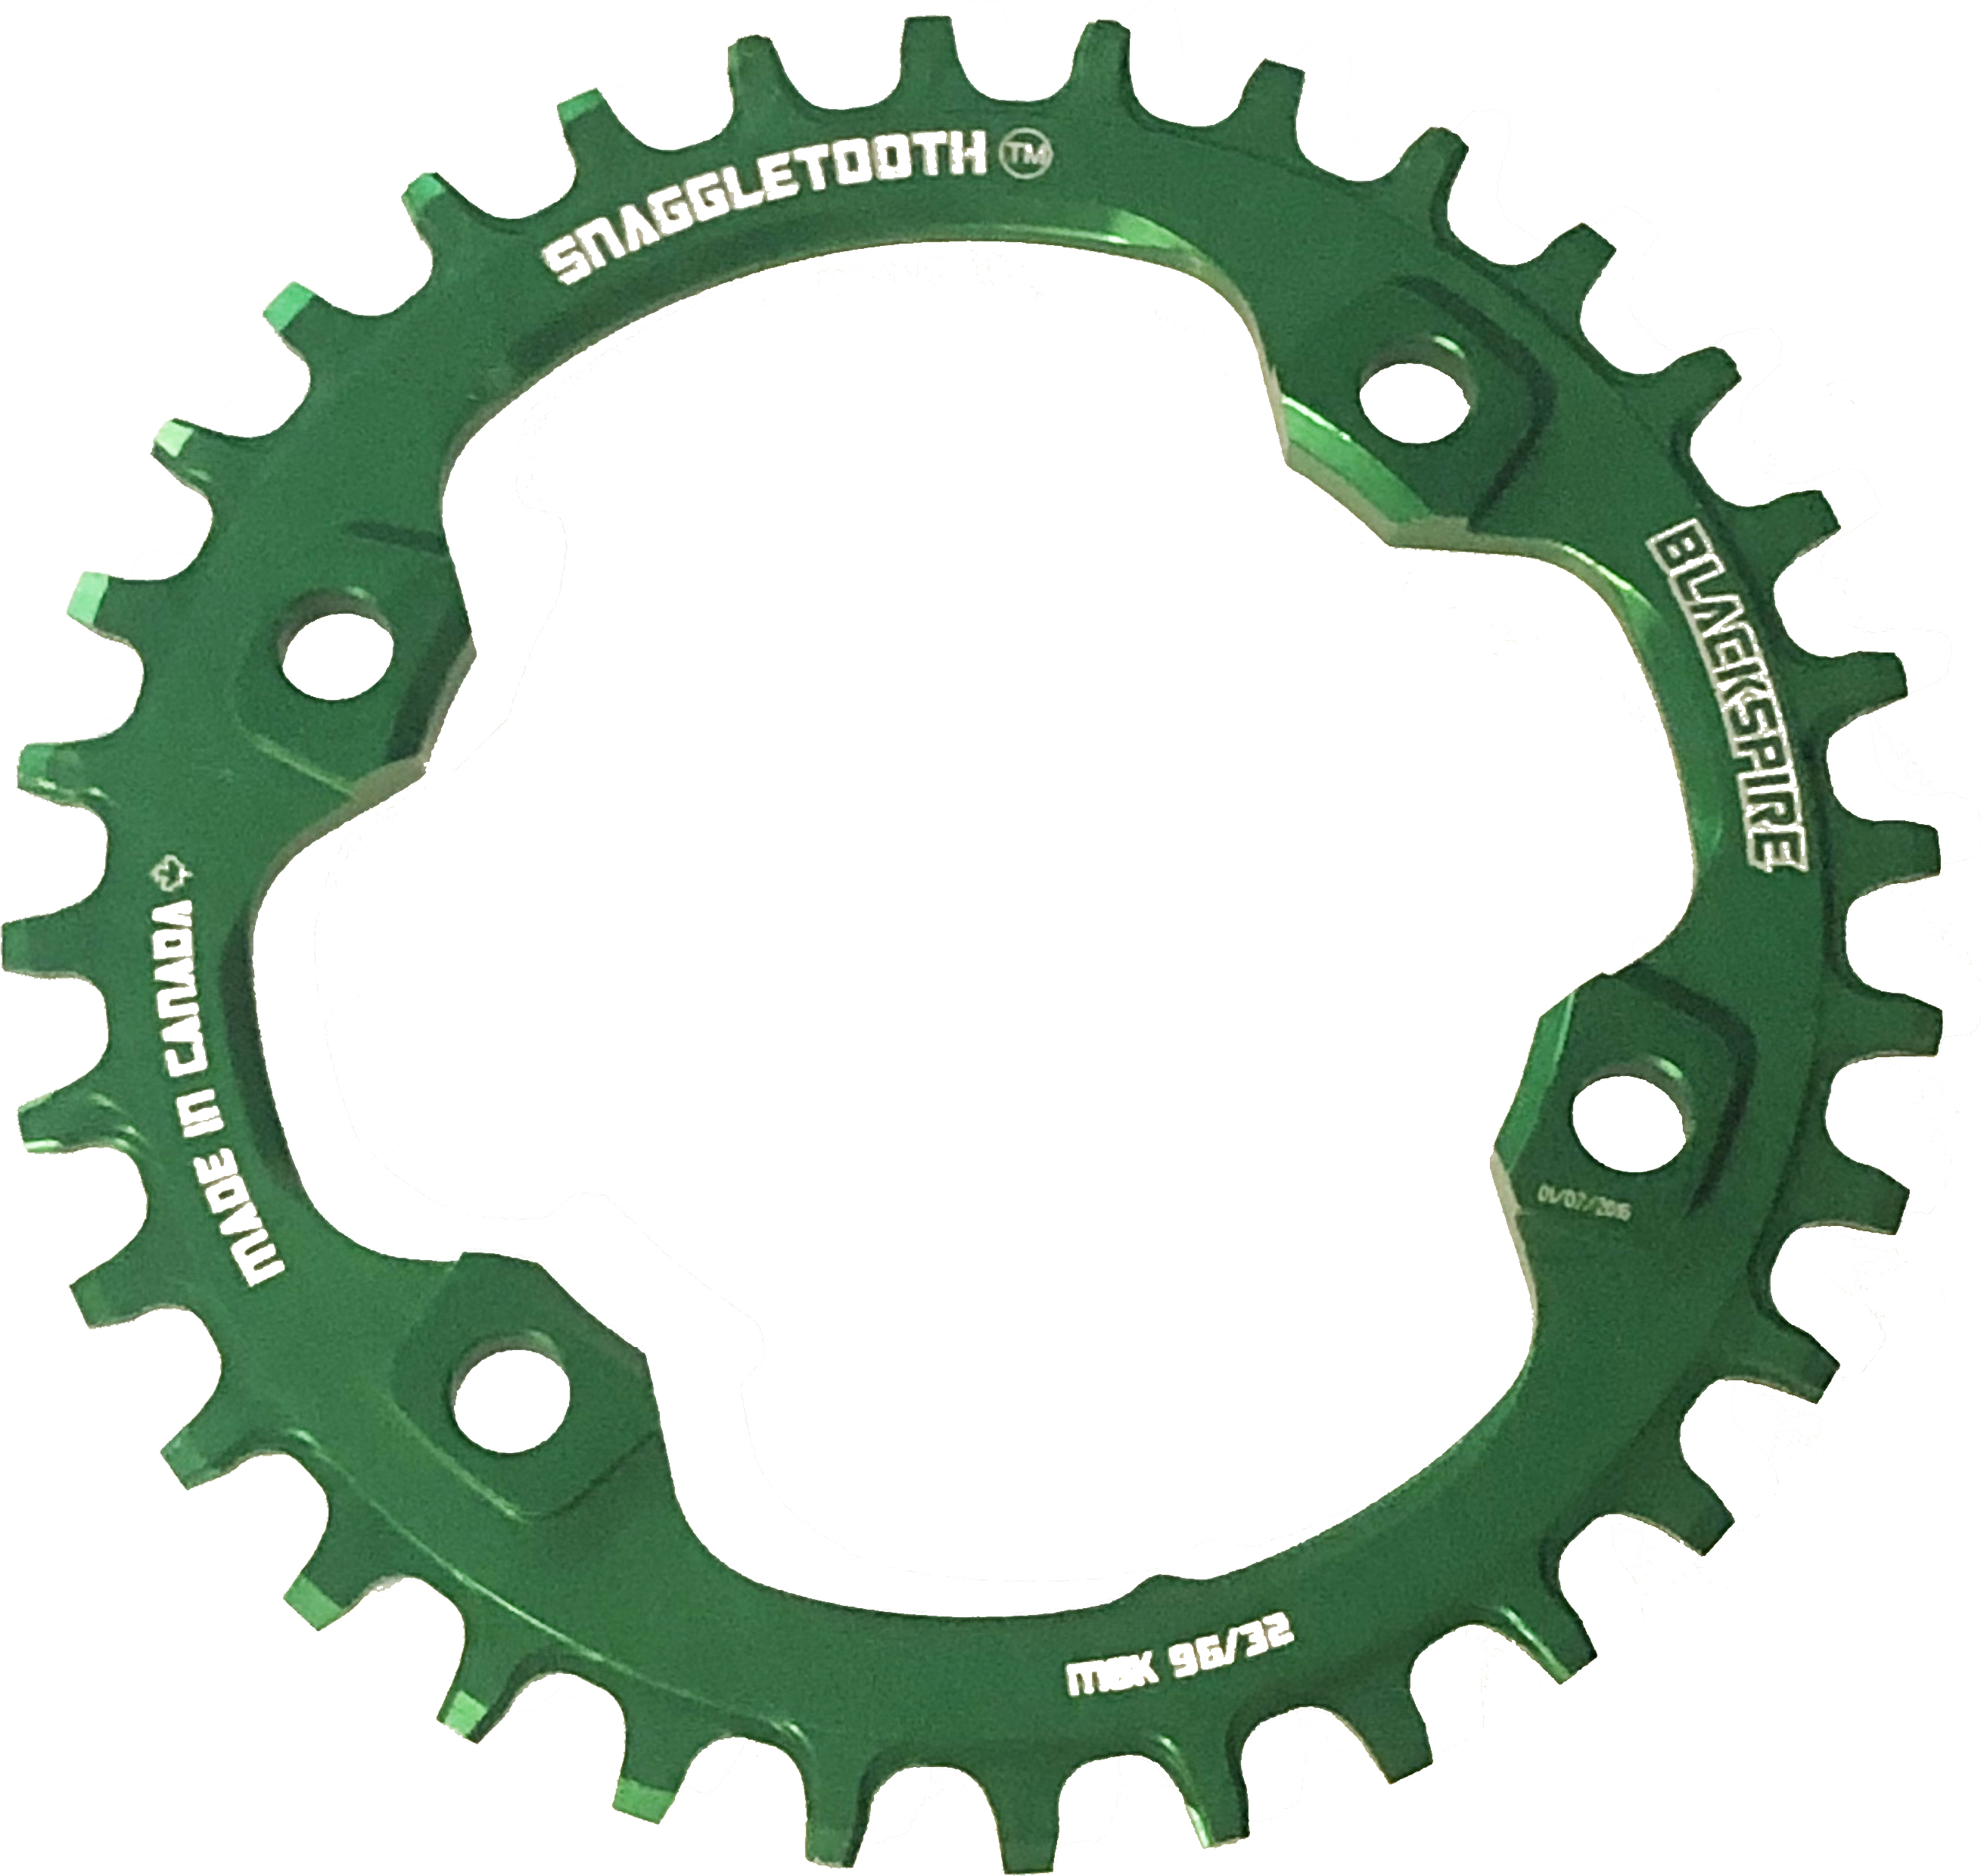 Blackspire Snaggletooth XT8000 32T 96BCD 4 Bolt NarrowWide Chainring Lime Green